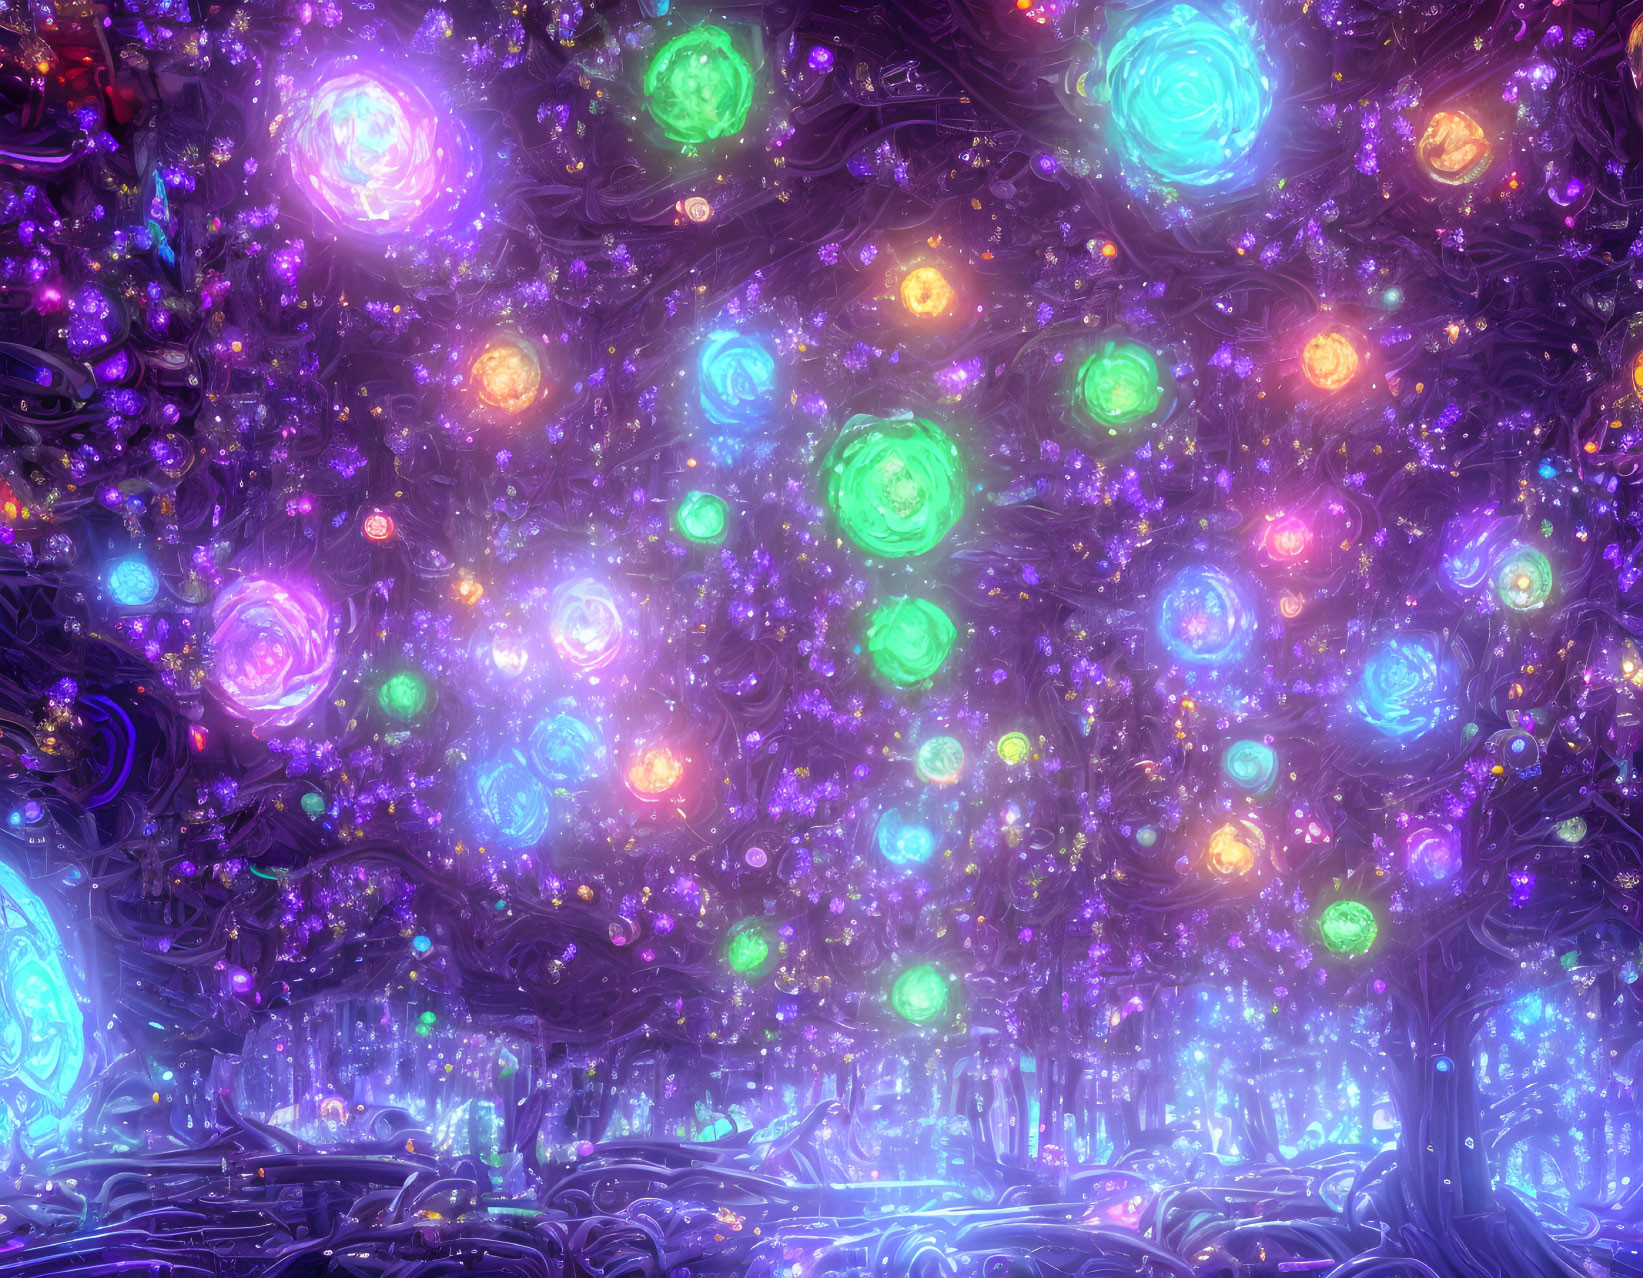 Luminescent forest with vibrant light orbs creating magical ambiance